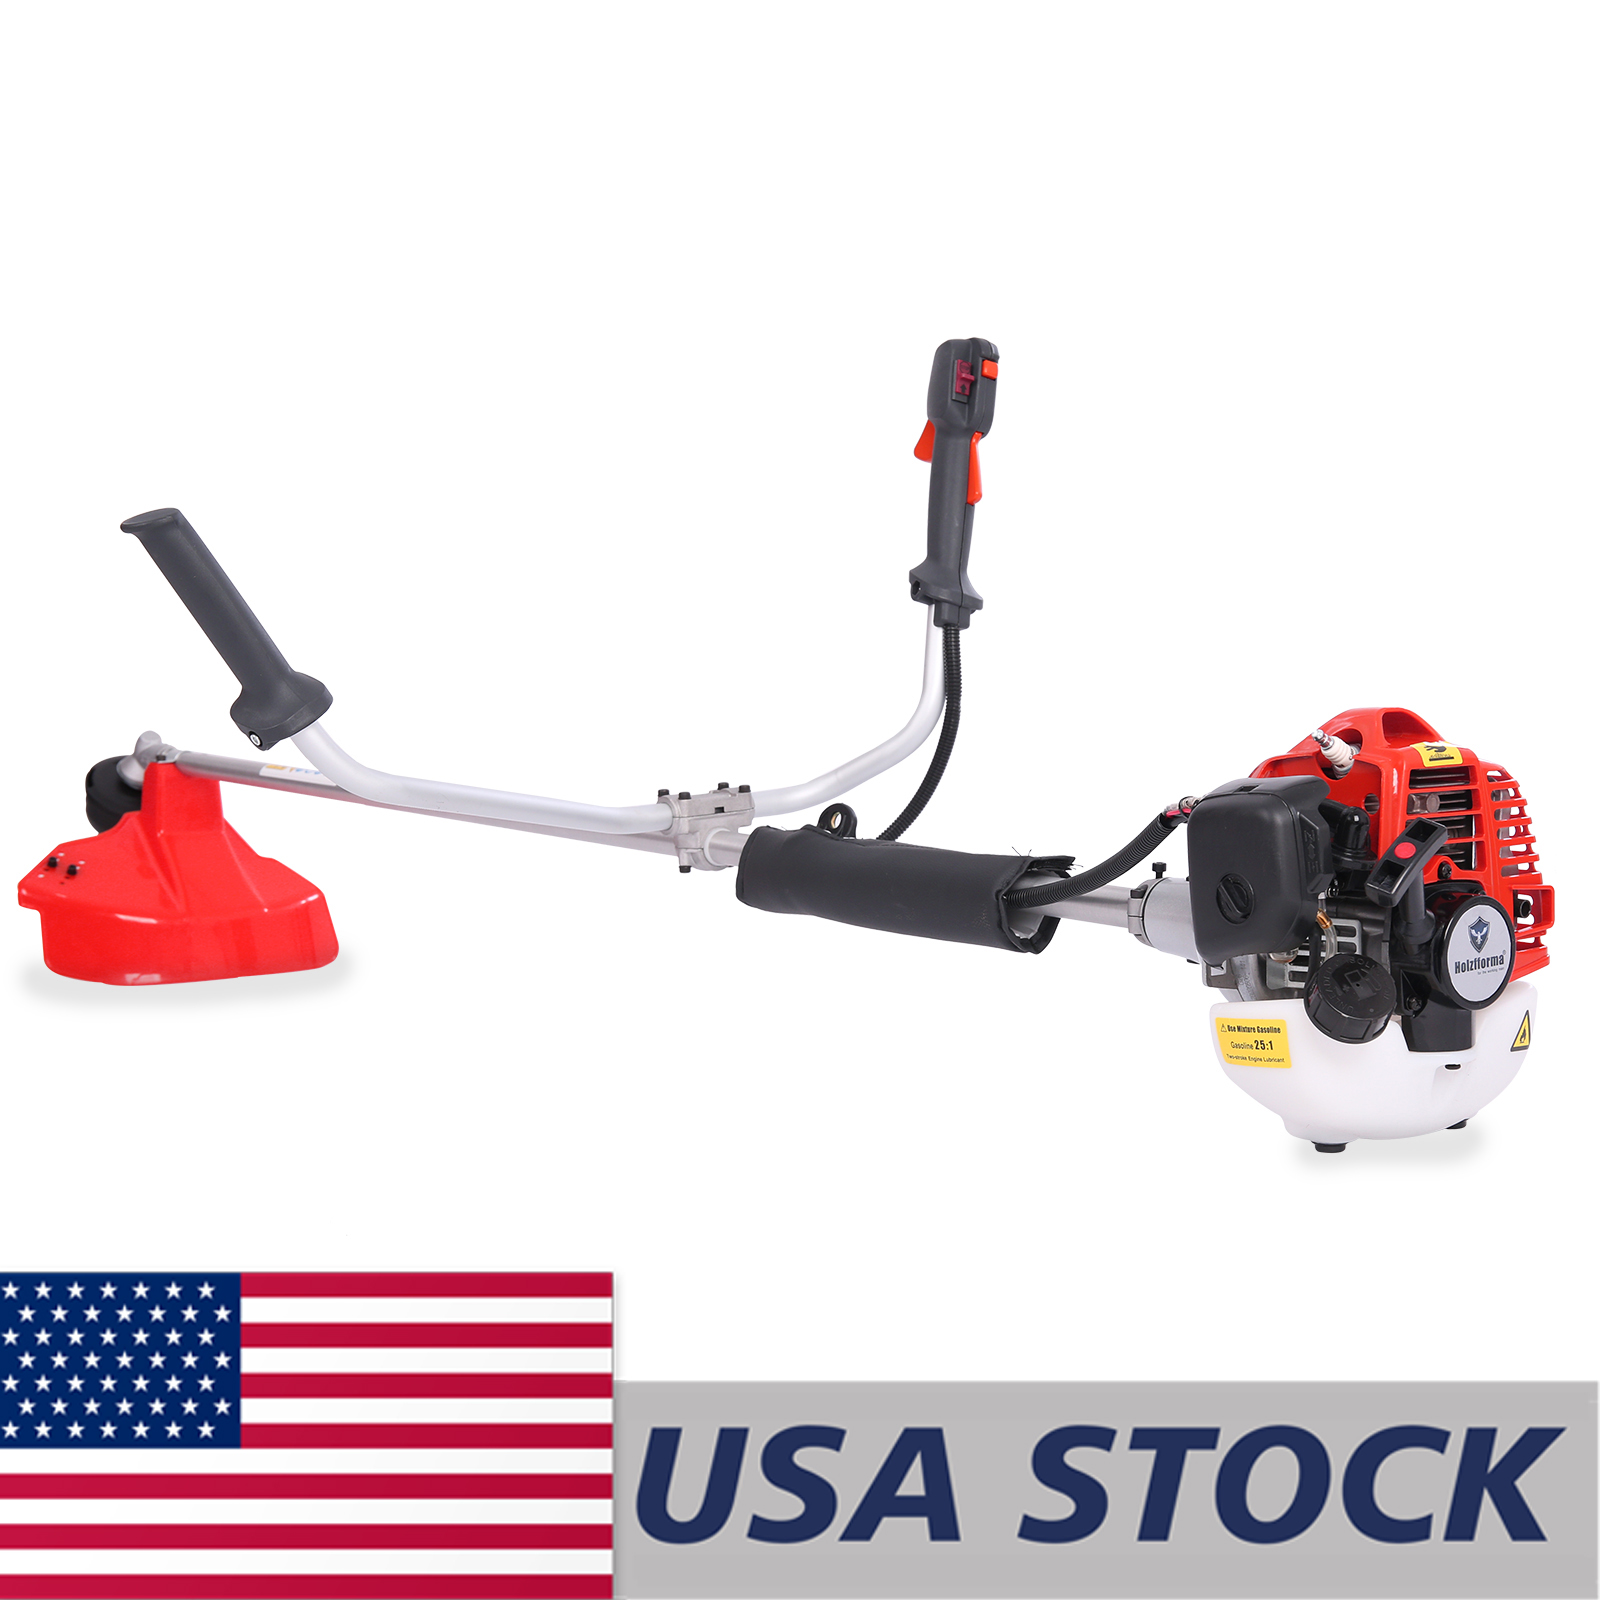 US STOCK - 25.4cc Holzfforma FF226R PRO Brush Cutter Assembly With Drive tube Handle bar Trimmer blade (without trimmer head) Full harness Produced By Farmertec All Parts Are Compatible With Husq 226R 2-4 Days Delivery Time Fast Shipping For US Customers Only